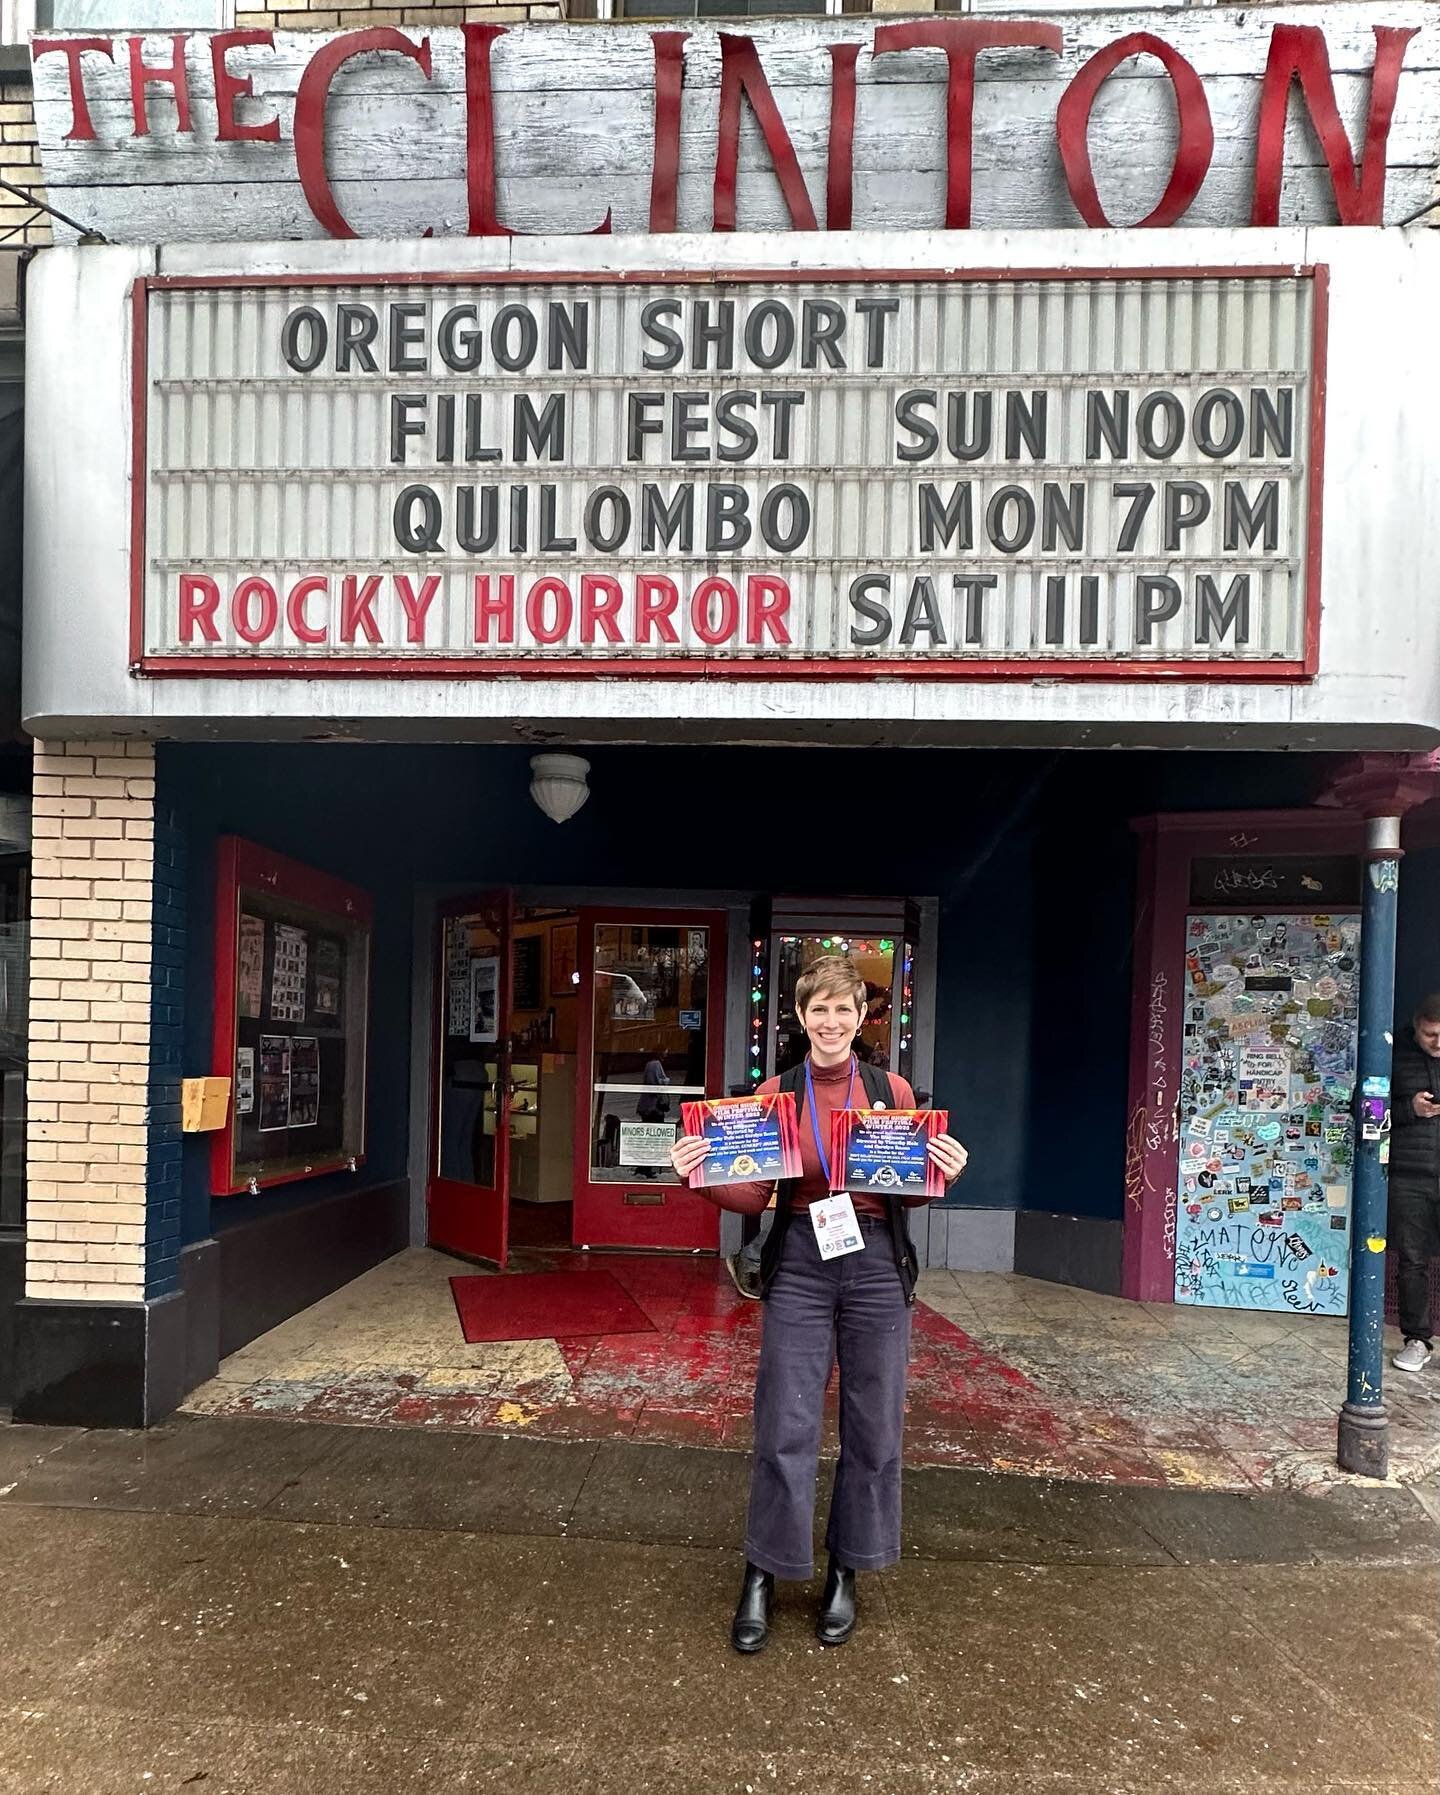 we won!! 🤩 my film &ldquo;The Diagnosis&rdquo; was a Finalist for Best Relationship Drama and the WINNER of Most Original Concept at the Oregon Short Film Festival last weekend. I&rsquo;m so proud to share this achievement with my mom, whose badass 